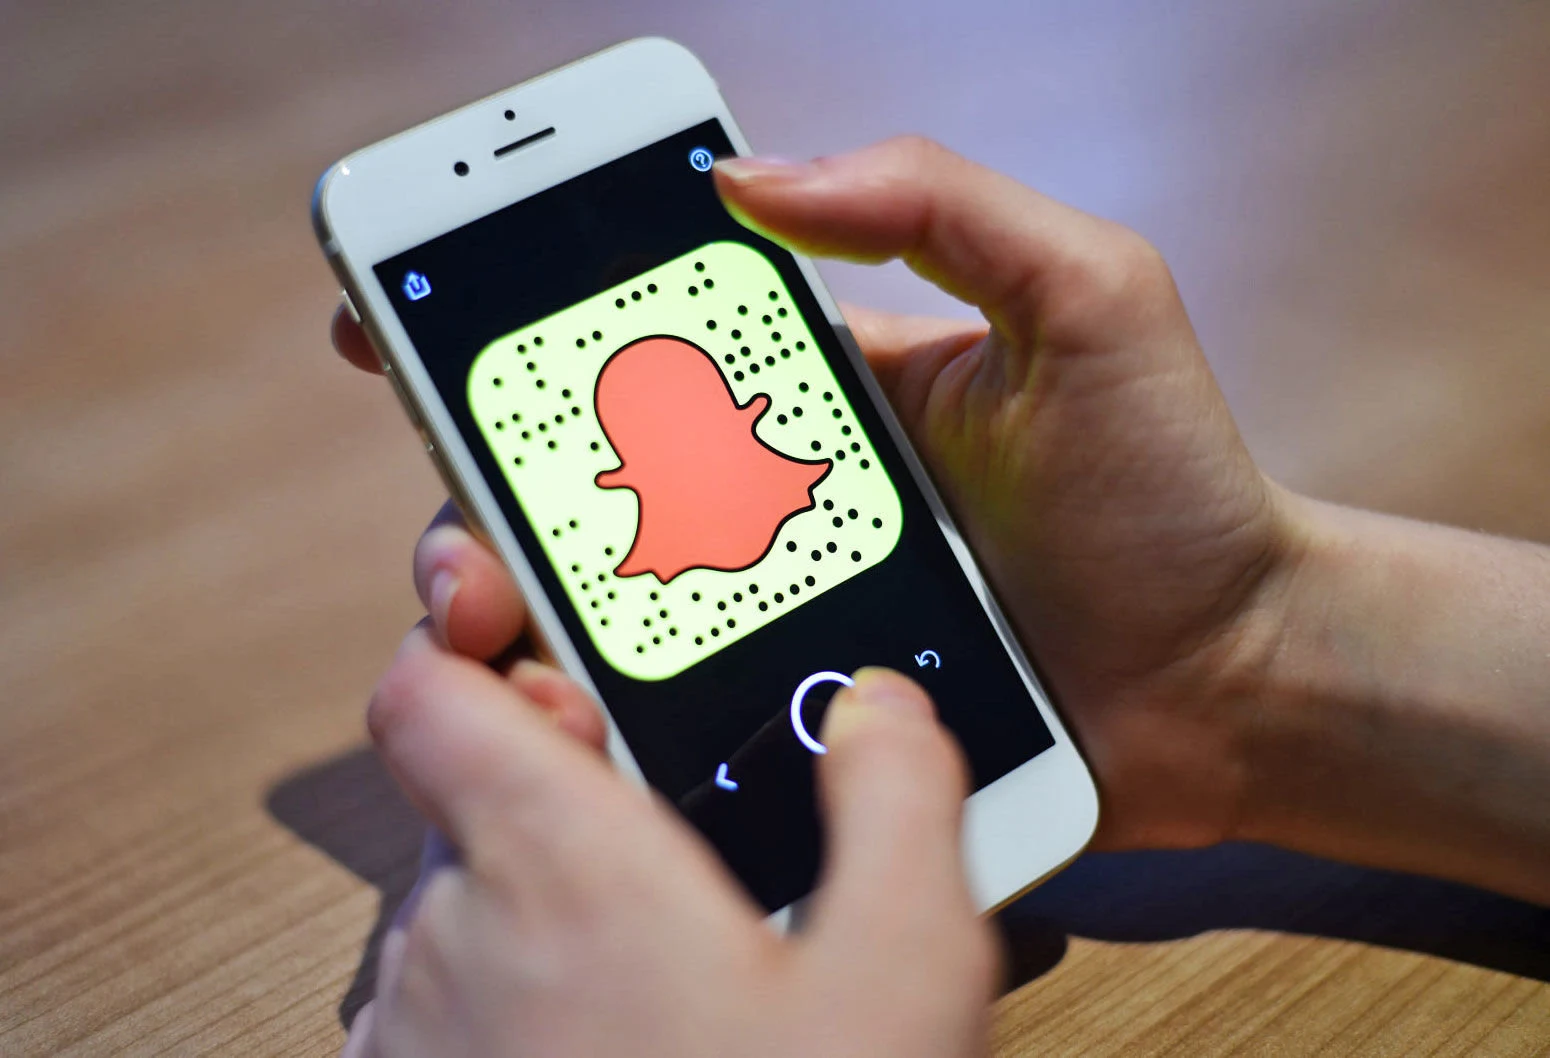 Snapchat adds end-to-end encryption to protect users